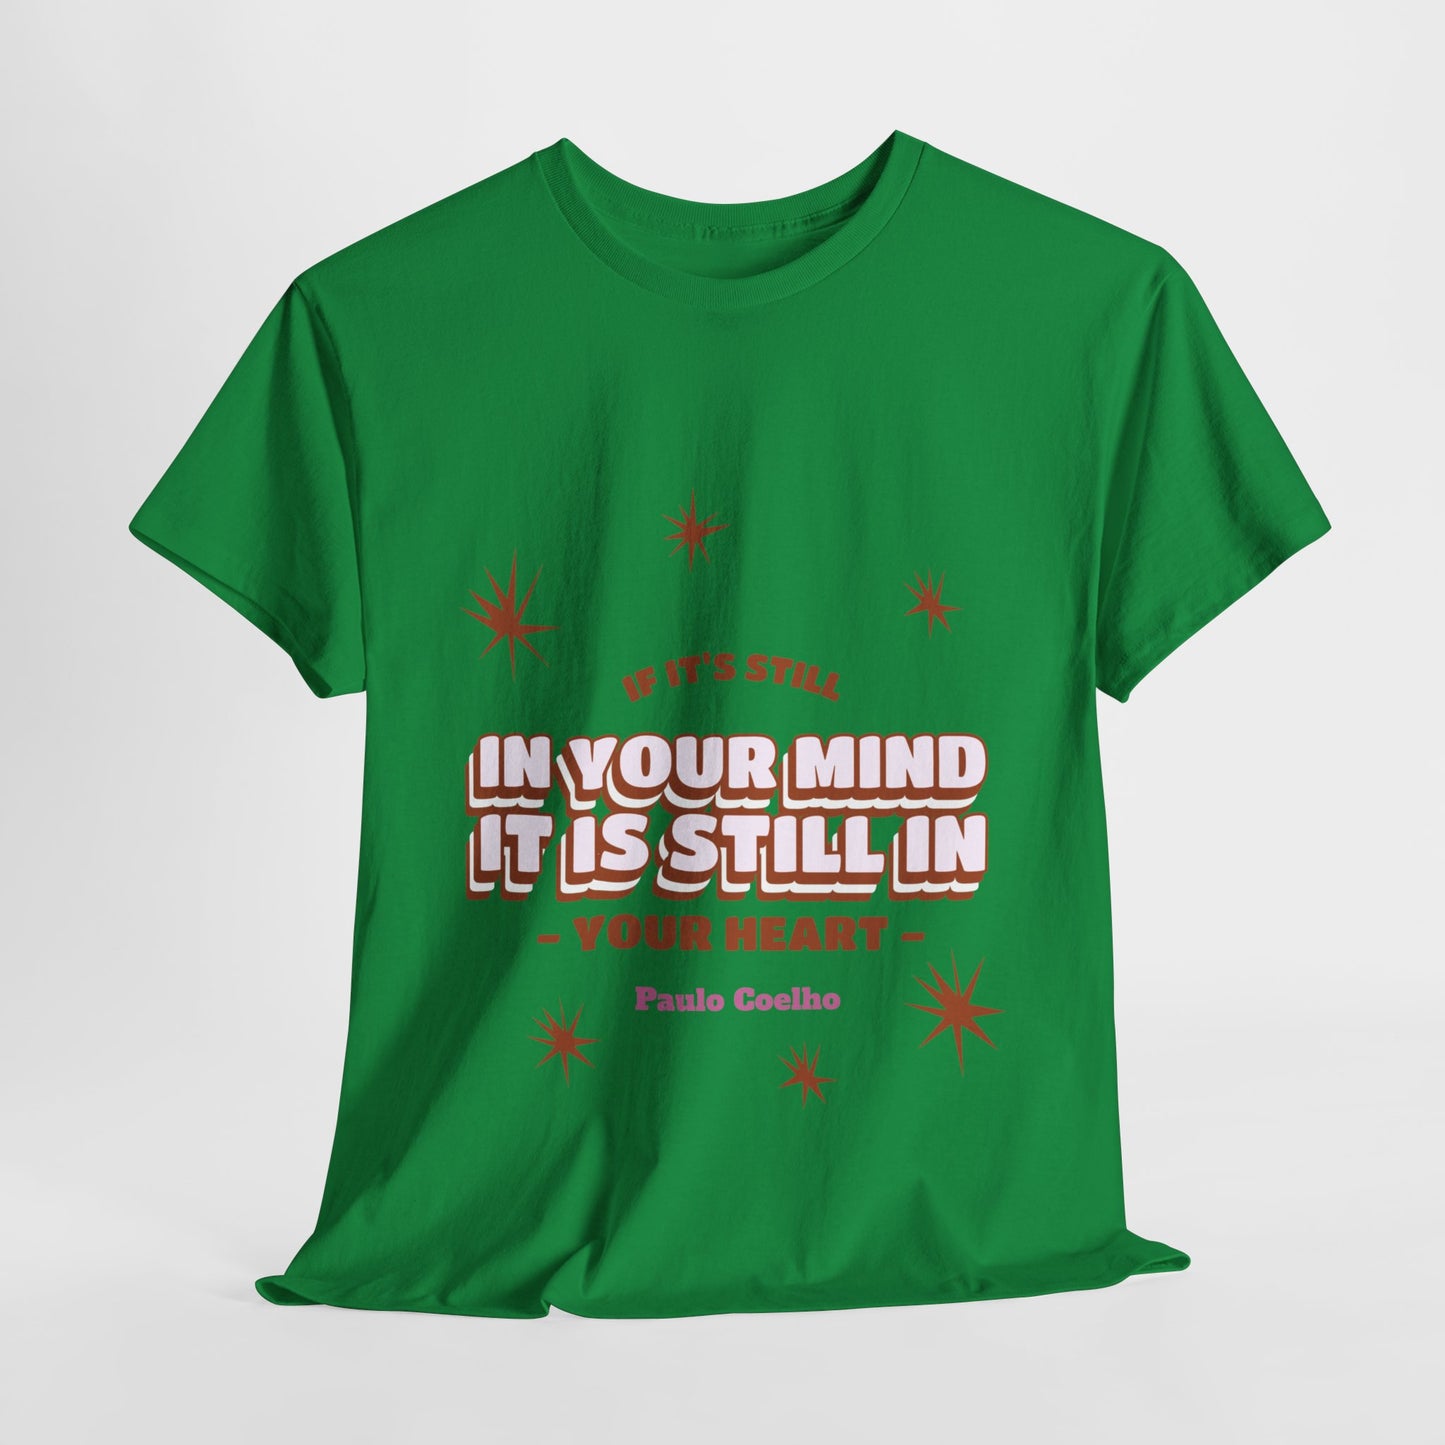 The Philosopher T-Shirt: If it's still in your mind, it is still in your heart